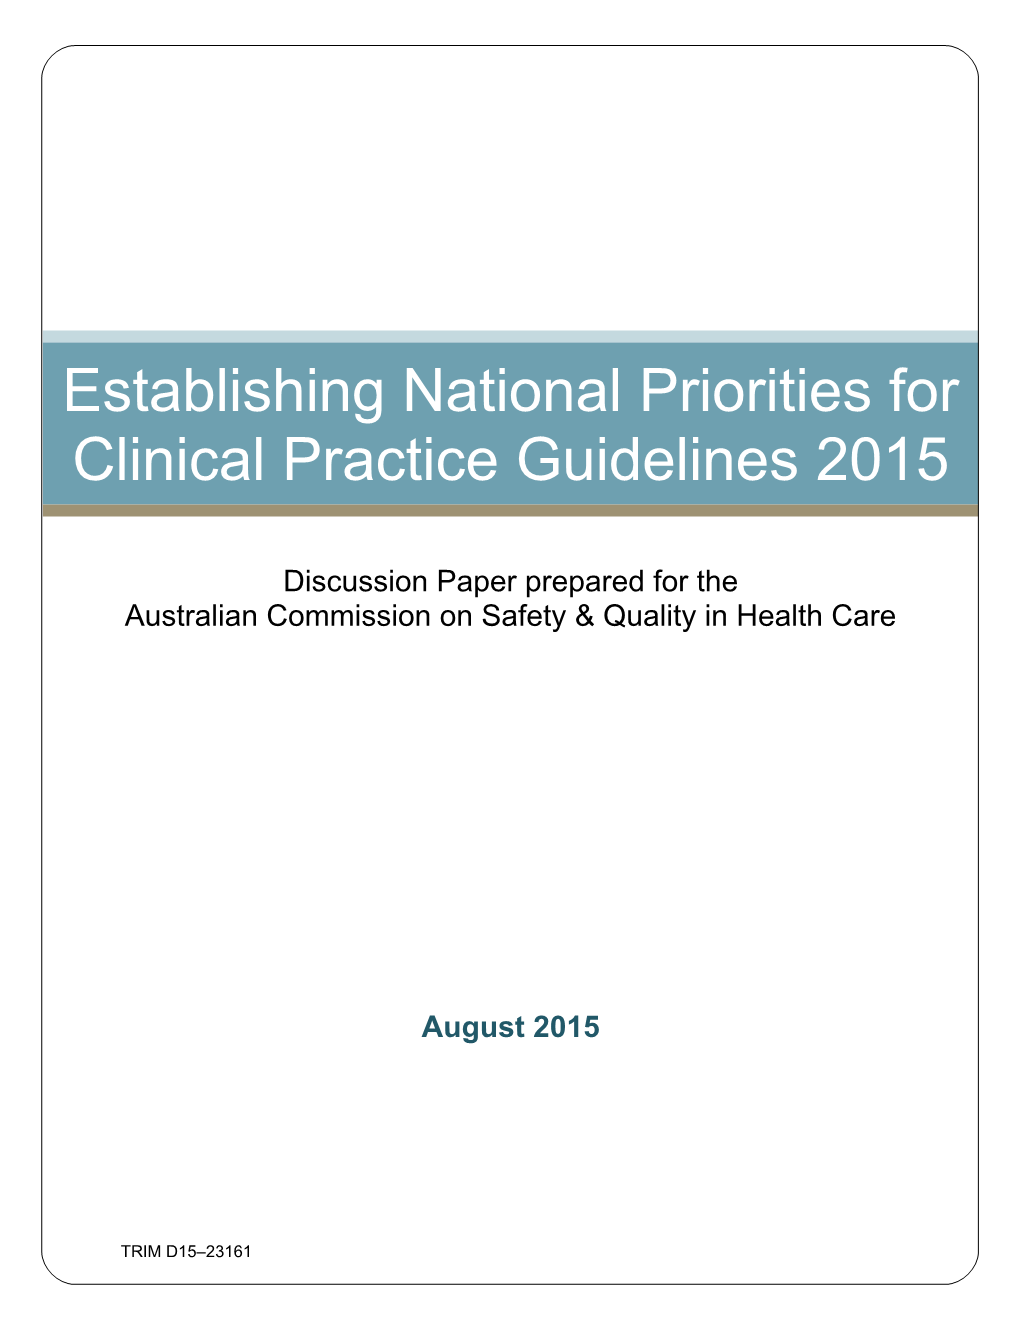 Establishing National Priorities for Clinical Practice Guidelines 2015